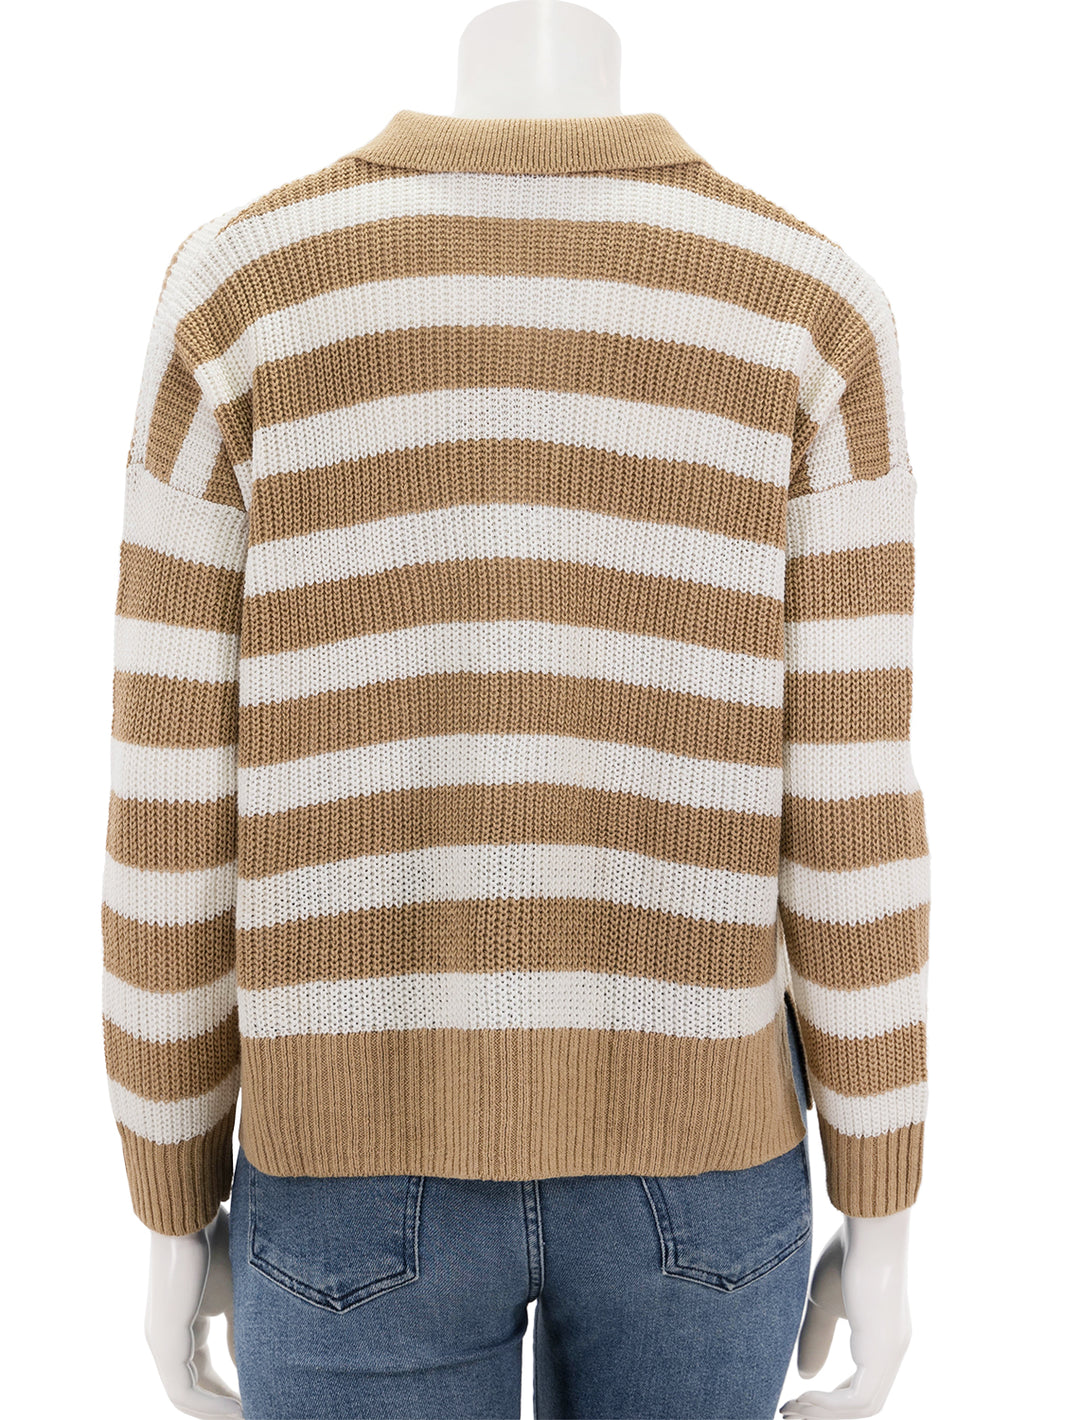 Back view of Faherty's miramar polo in natural stripe.